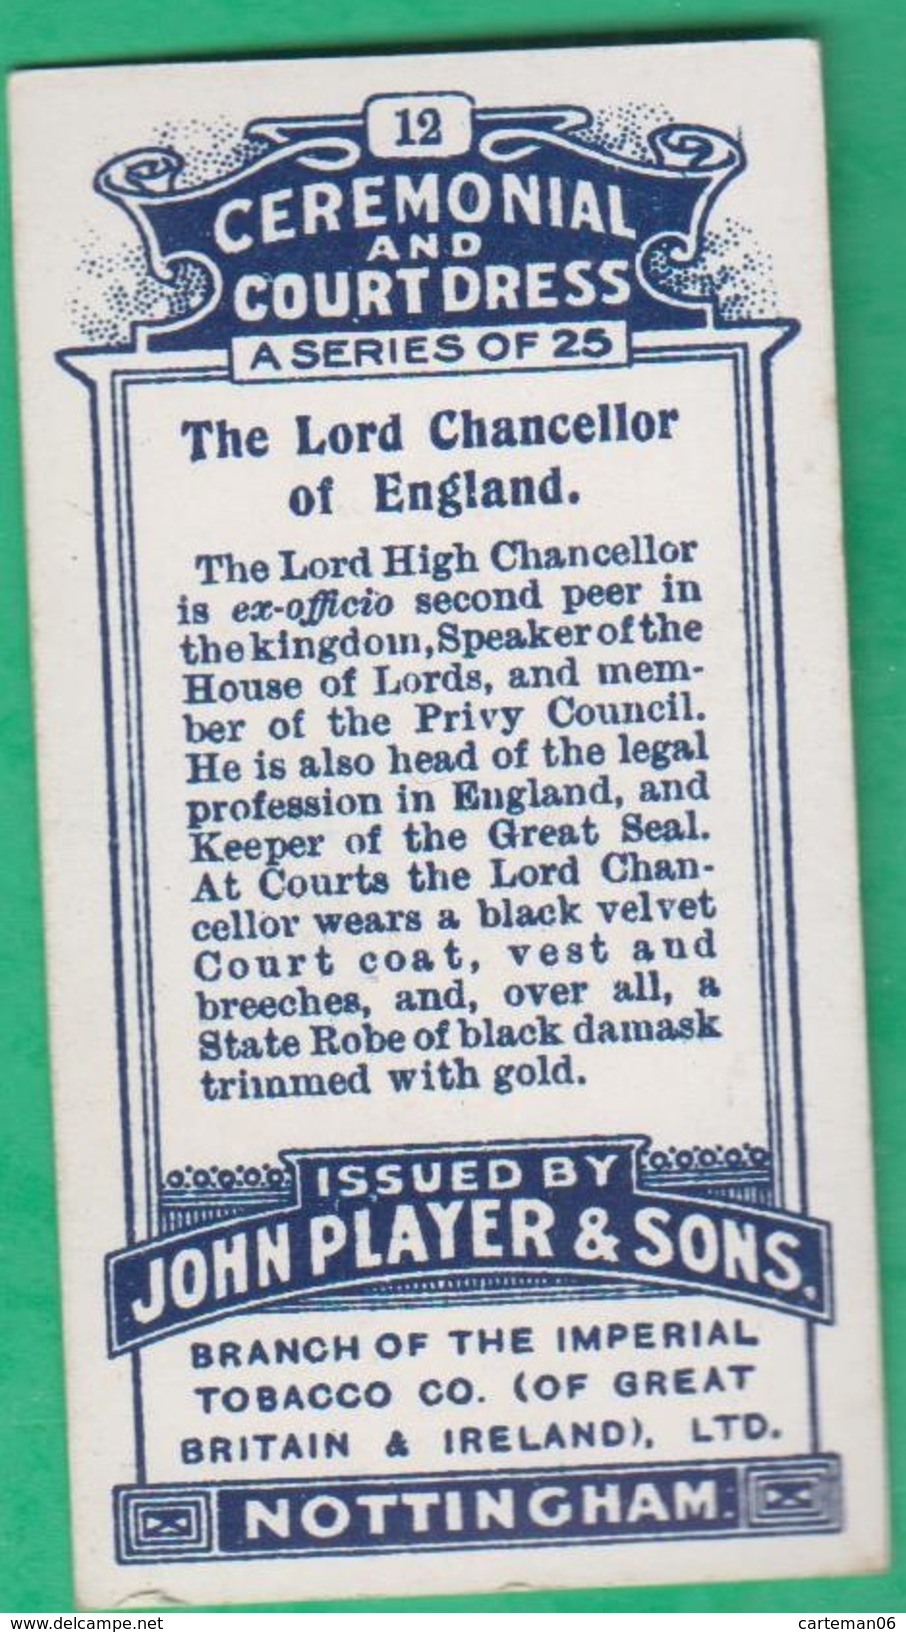 Chromo John Player & Sons, Player's Cigarettes, Ceremonial And Court Dress - The Lord Chancellorl Of England N°12 - Player's